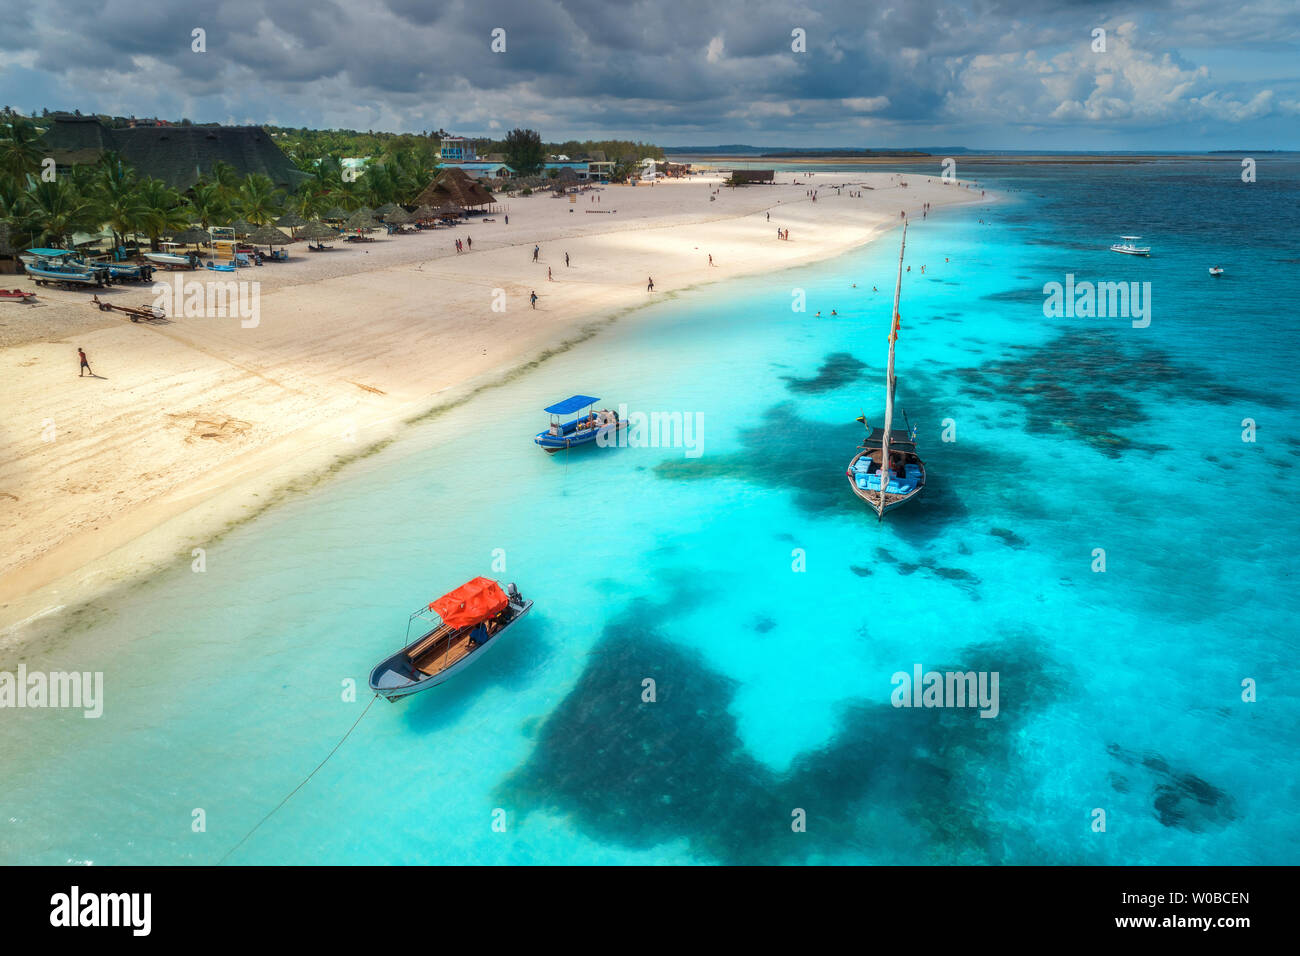 Aerial view of boats on tropical sea coast with sandy beach Stock Photo